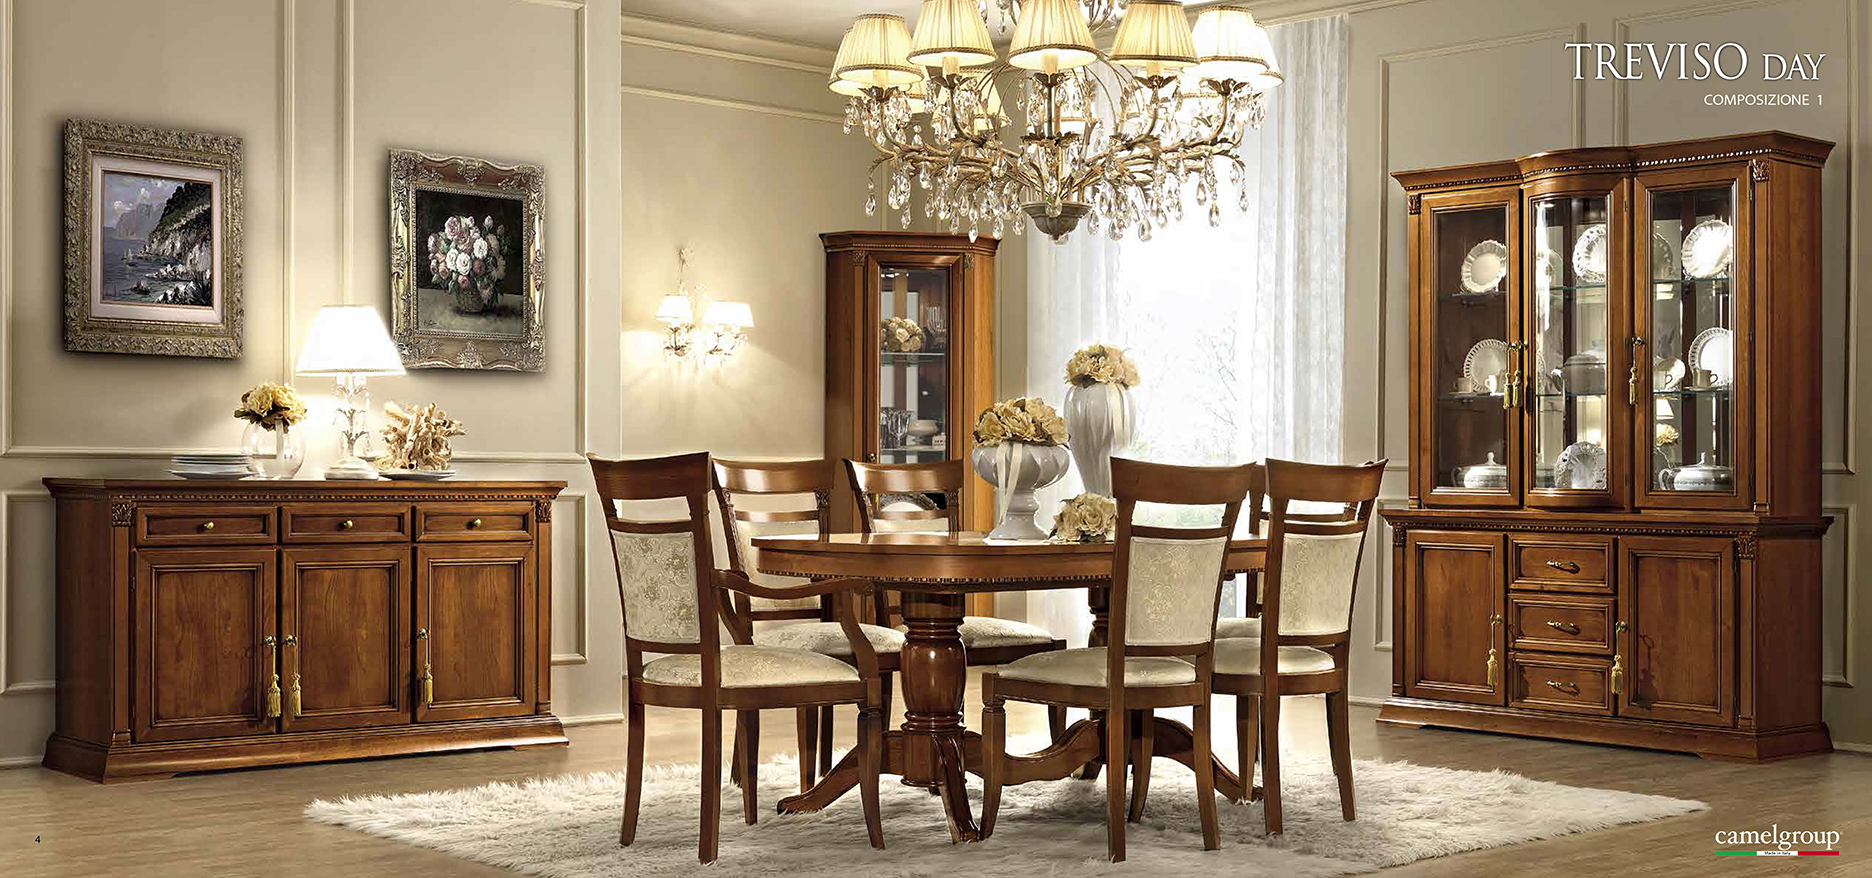 Dining Room Furniture Tables Treviso Cherry Day